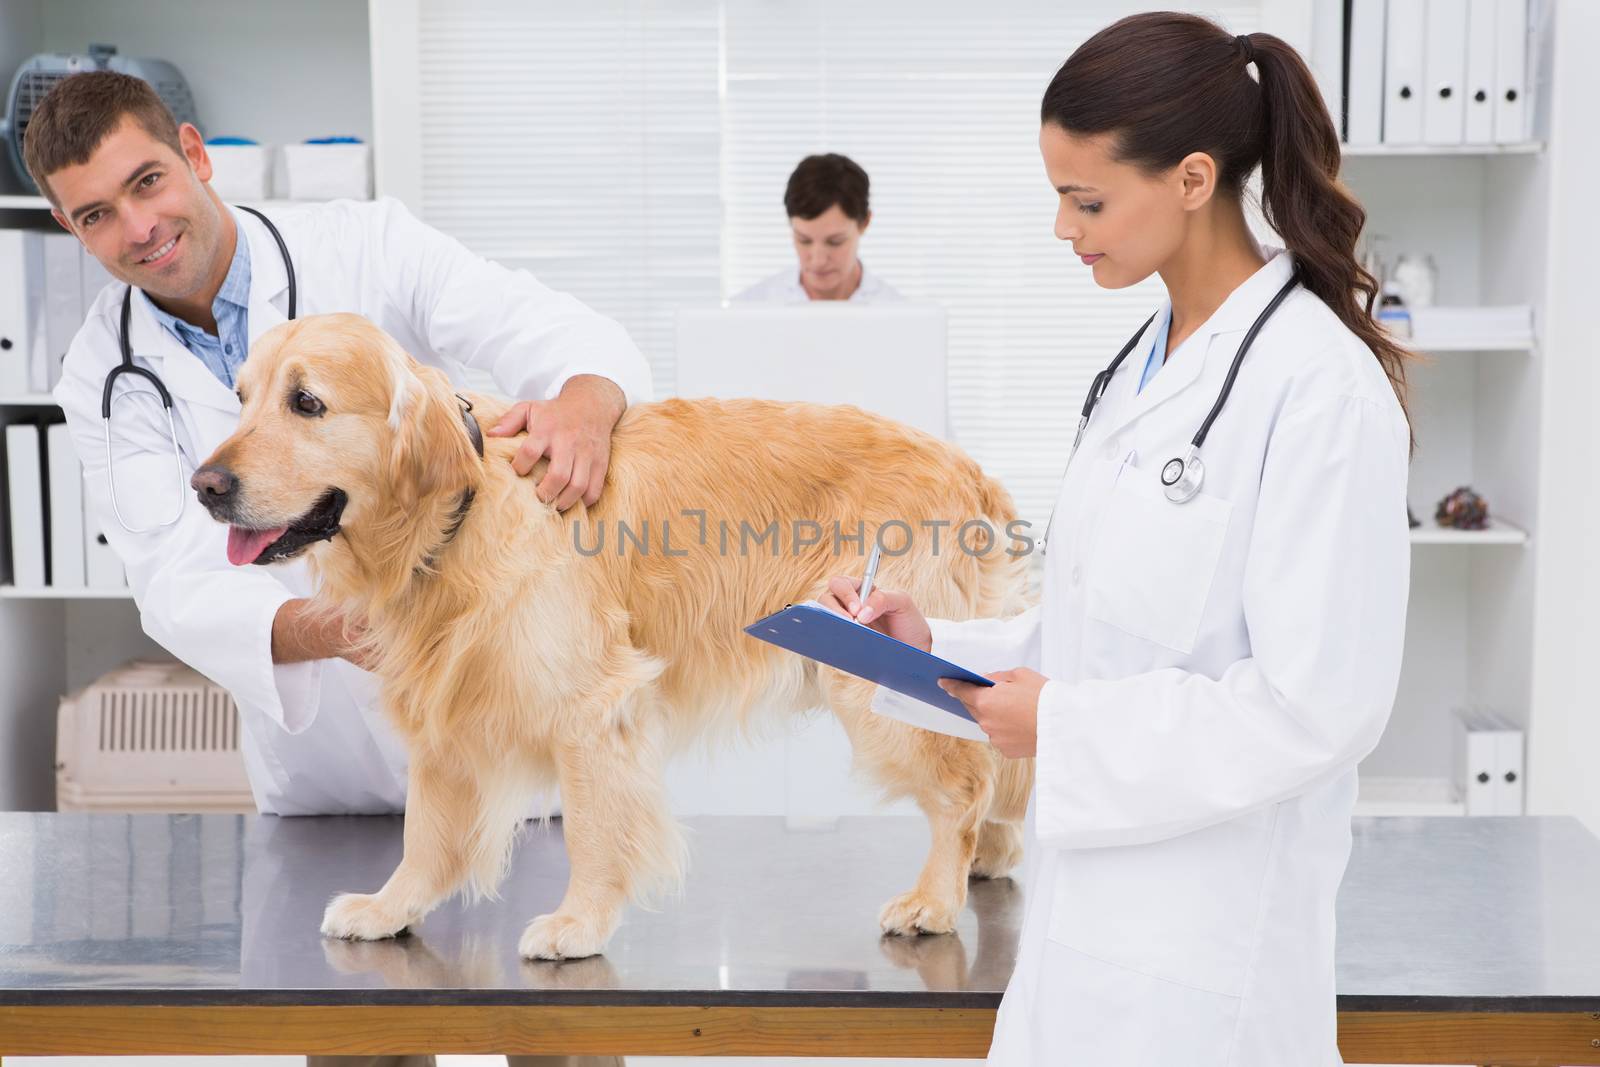 Veterinarian coworker examining a dog in medical office 